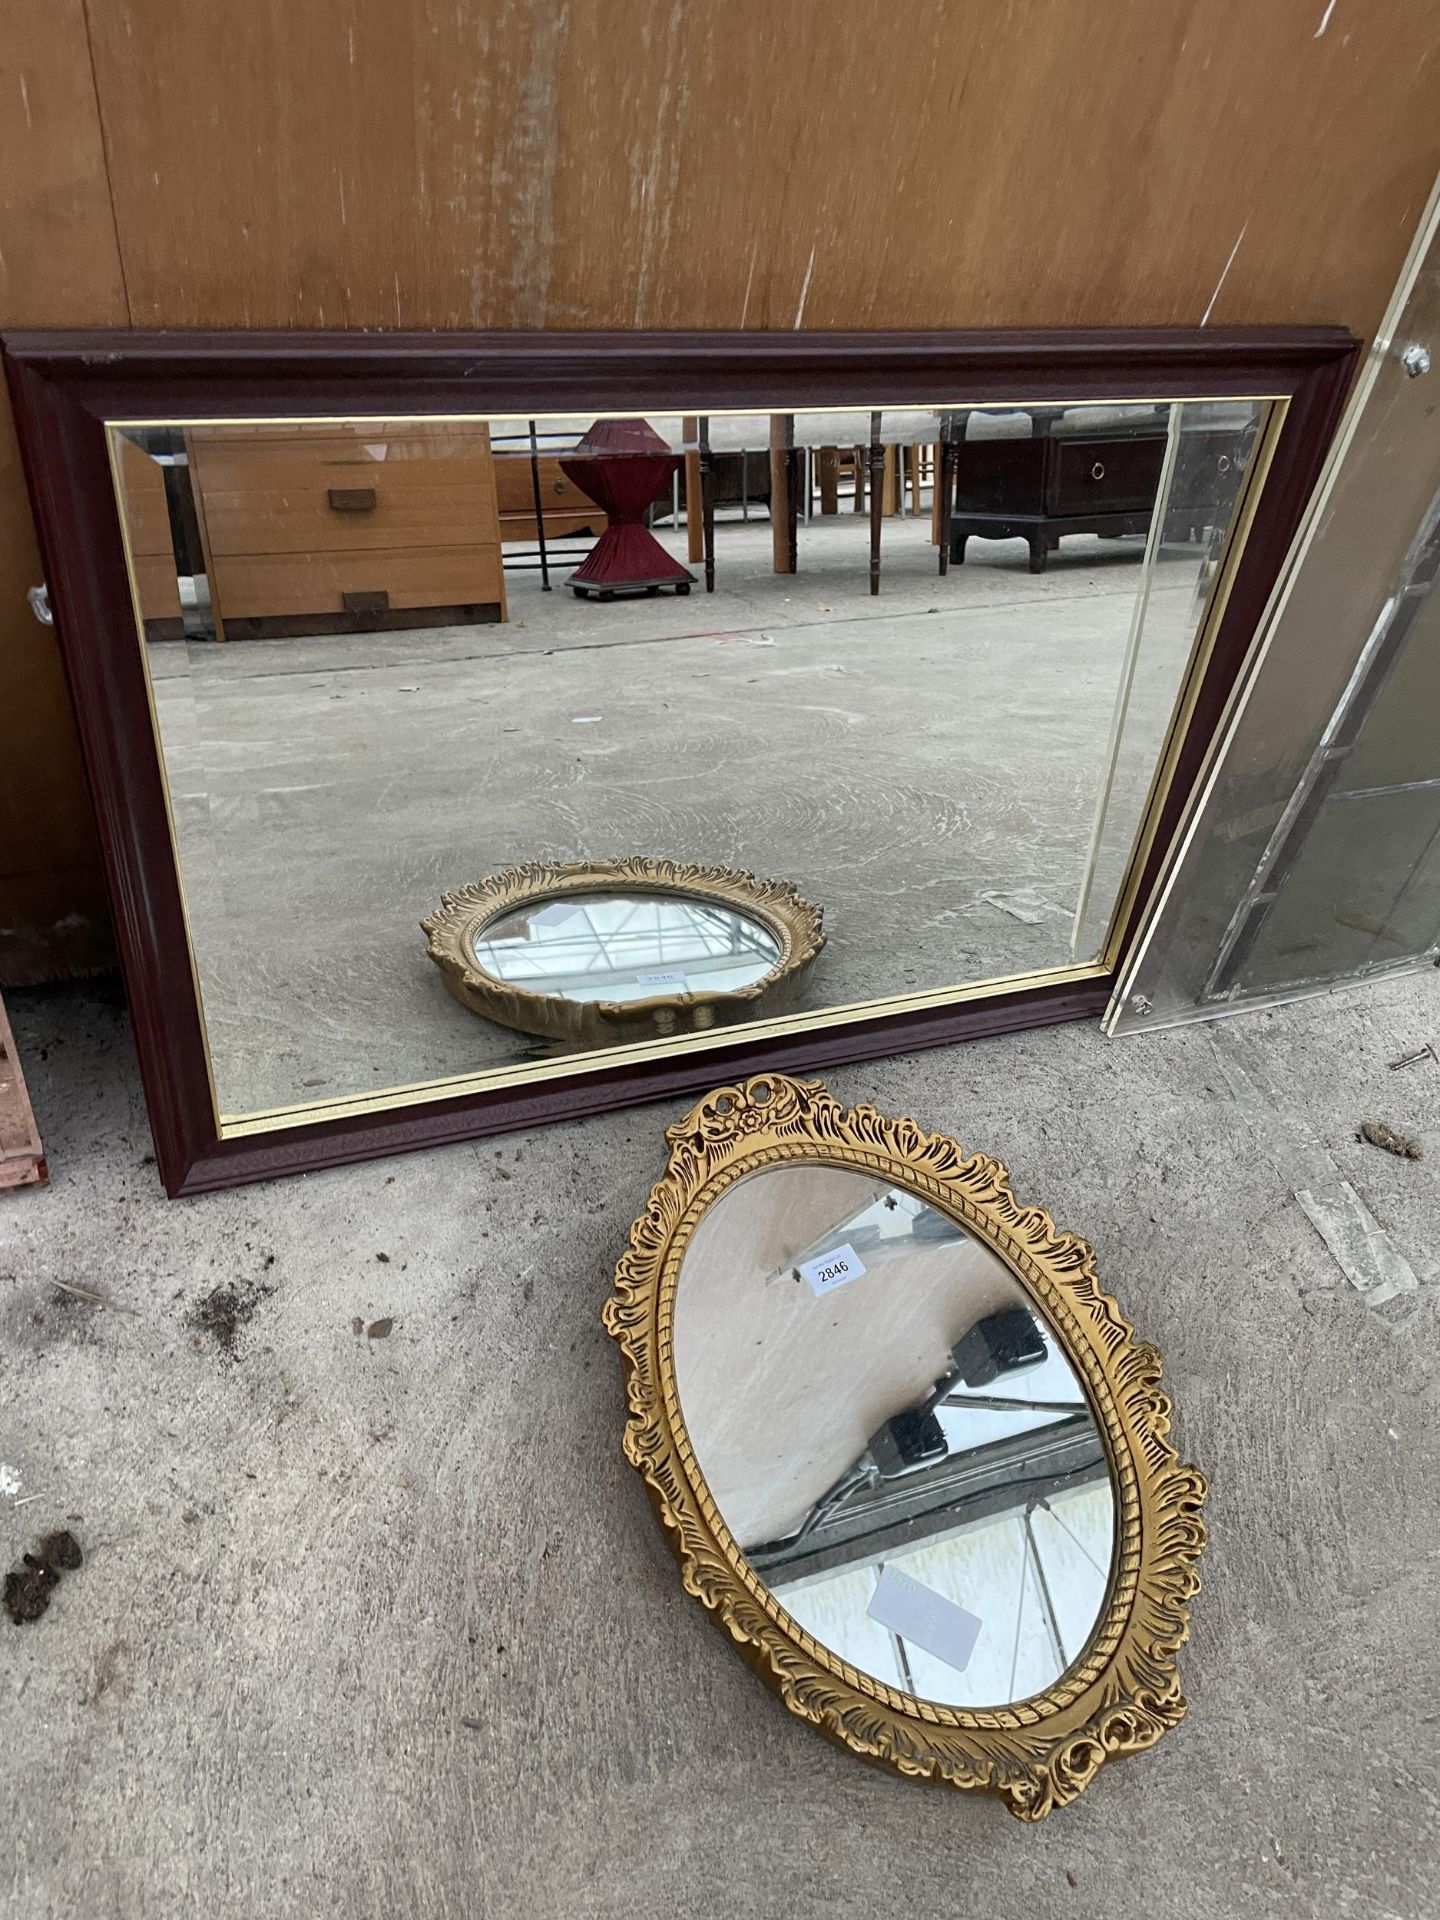 AN OVAL GILT FRAMED WALL MIRROR AND WOODEN FRAMED MIRROR